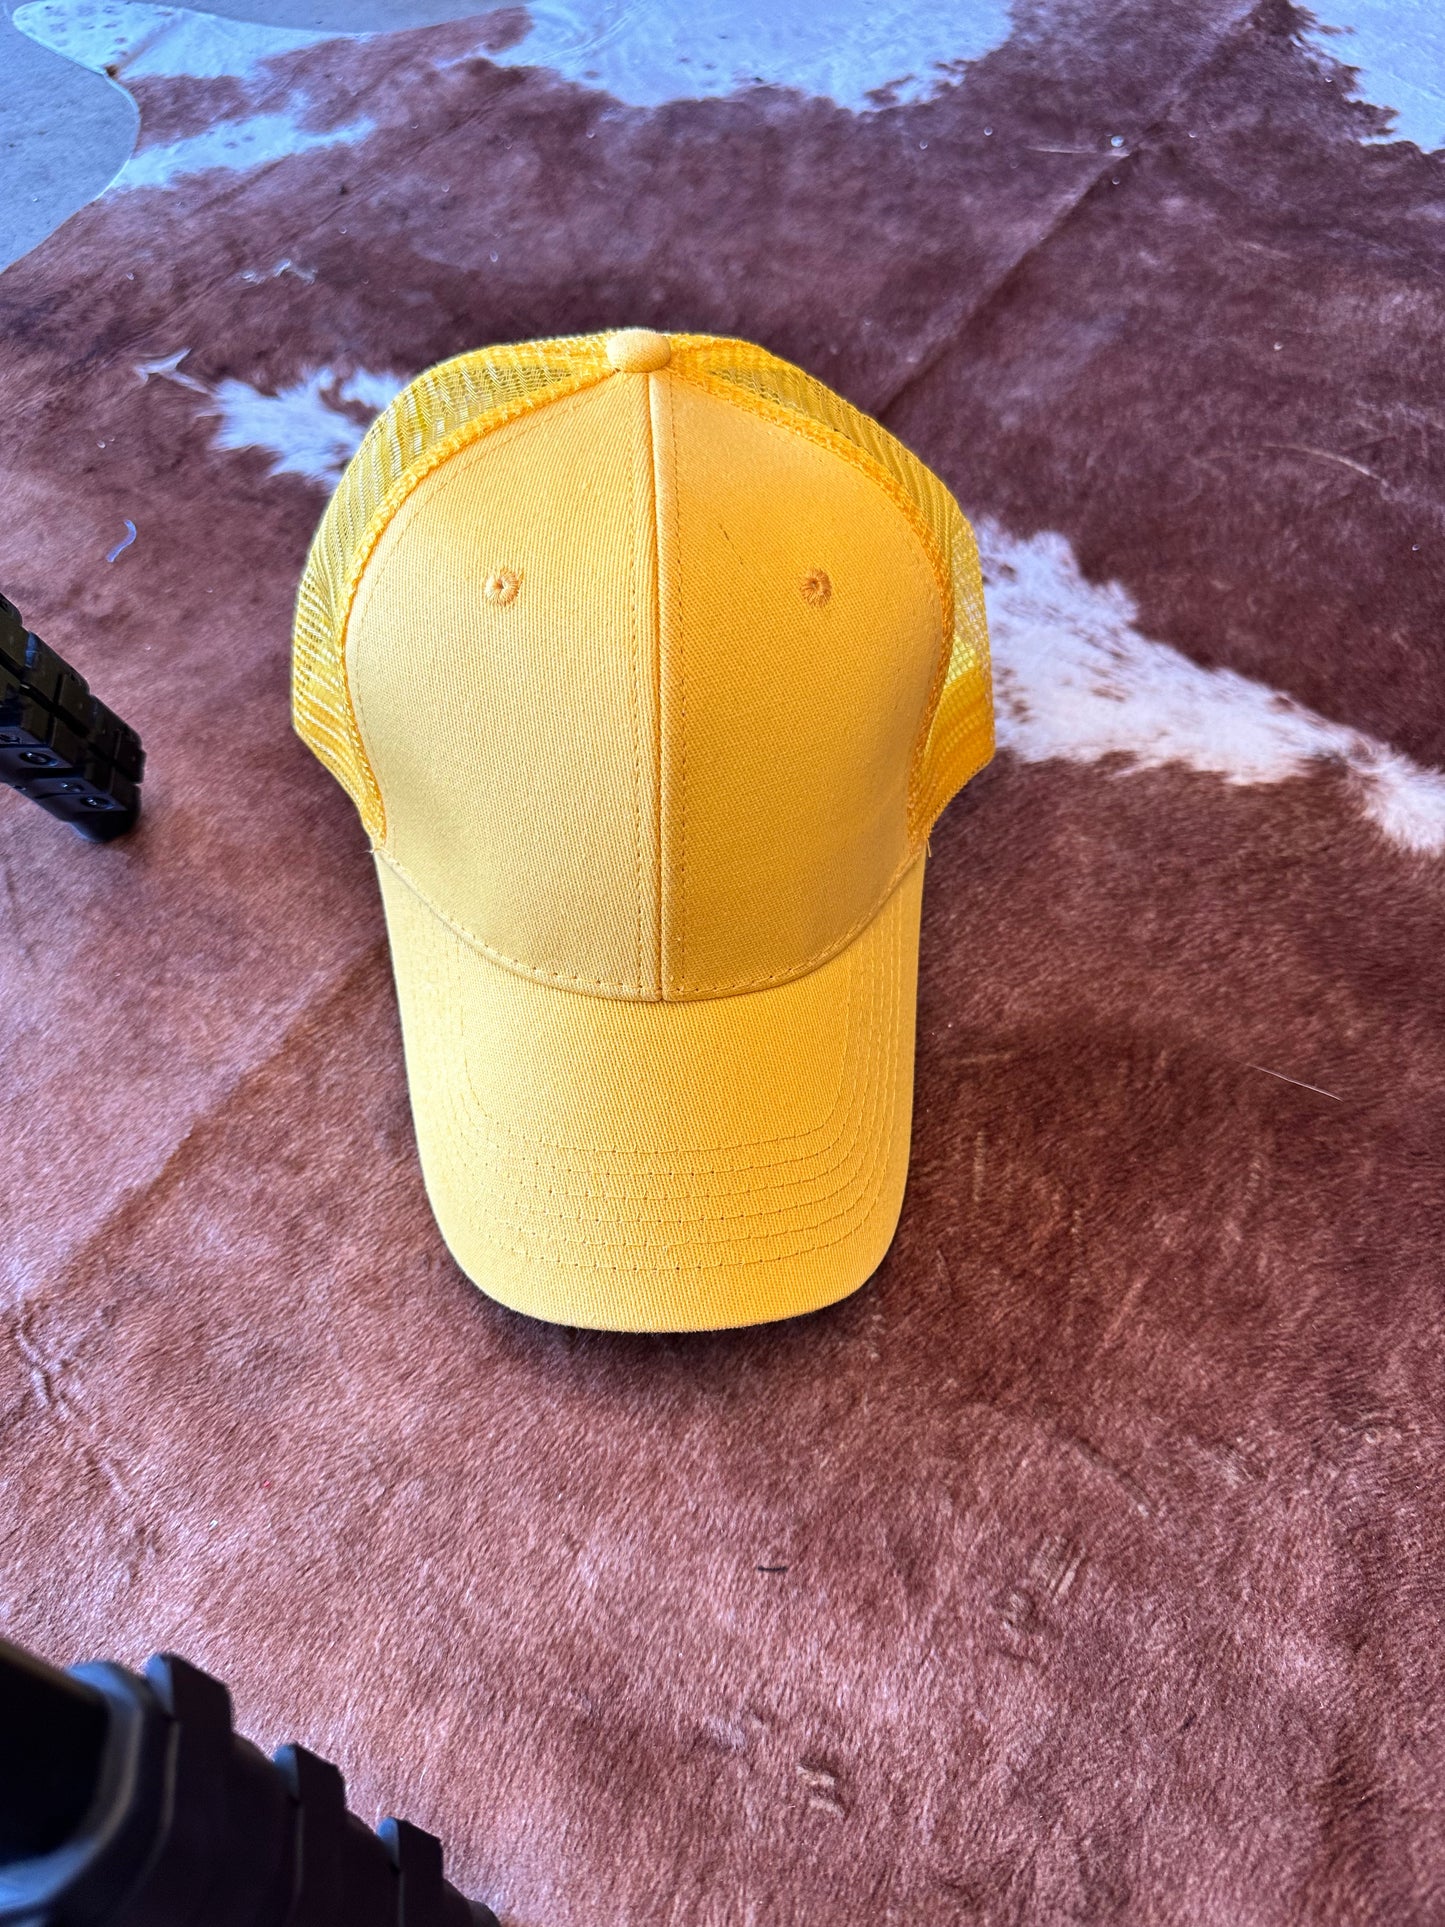 Yellow ball cap with structured crown and mesh back